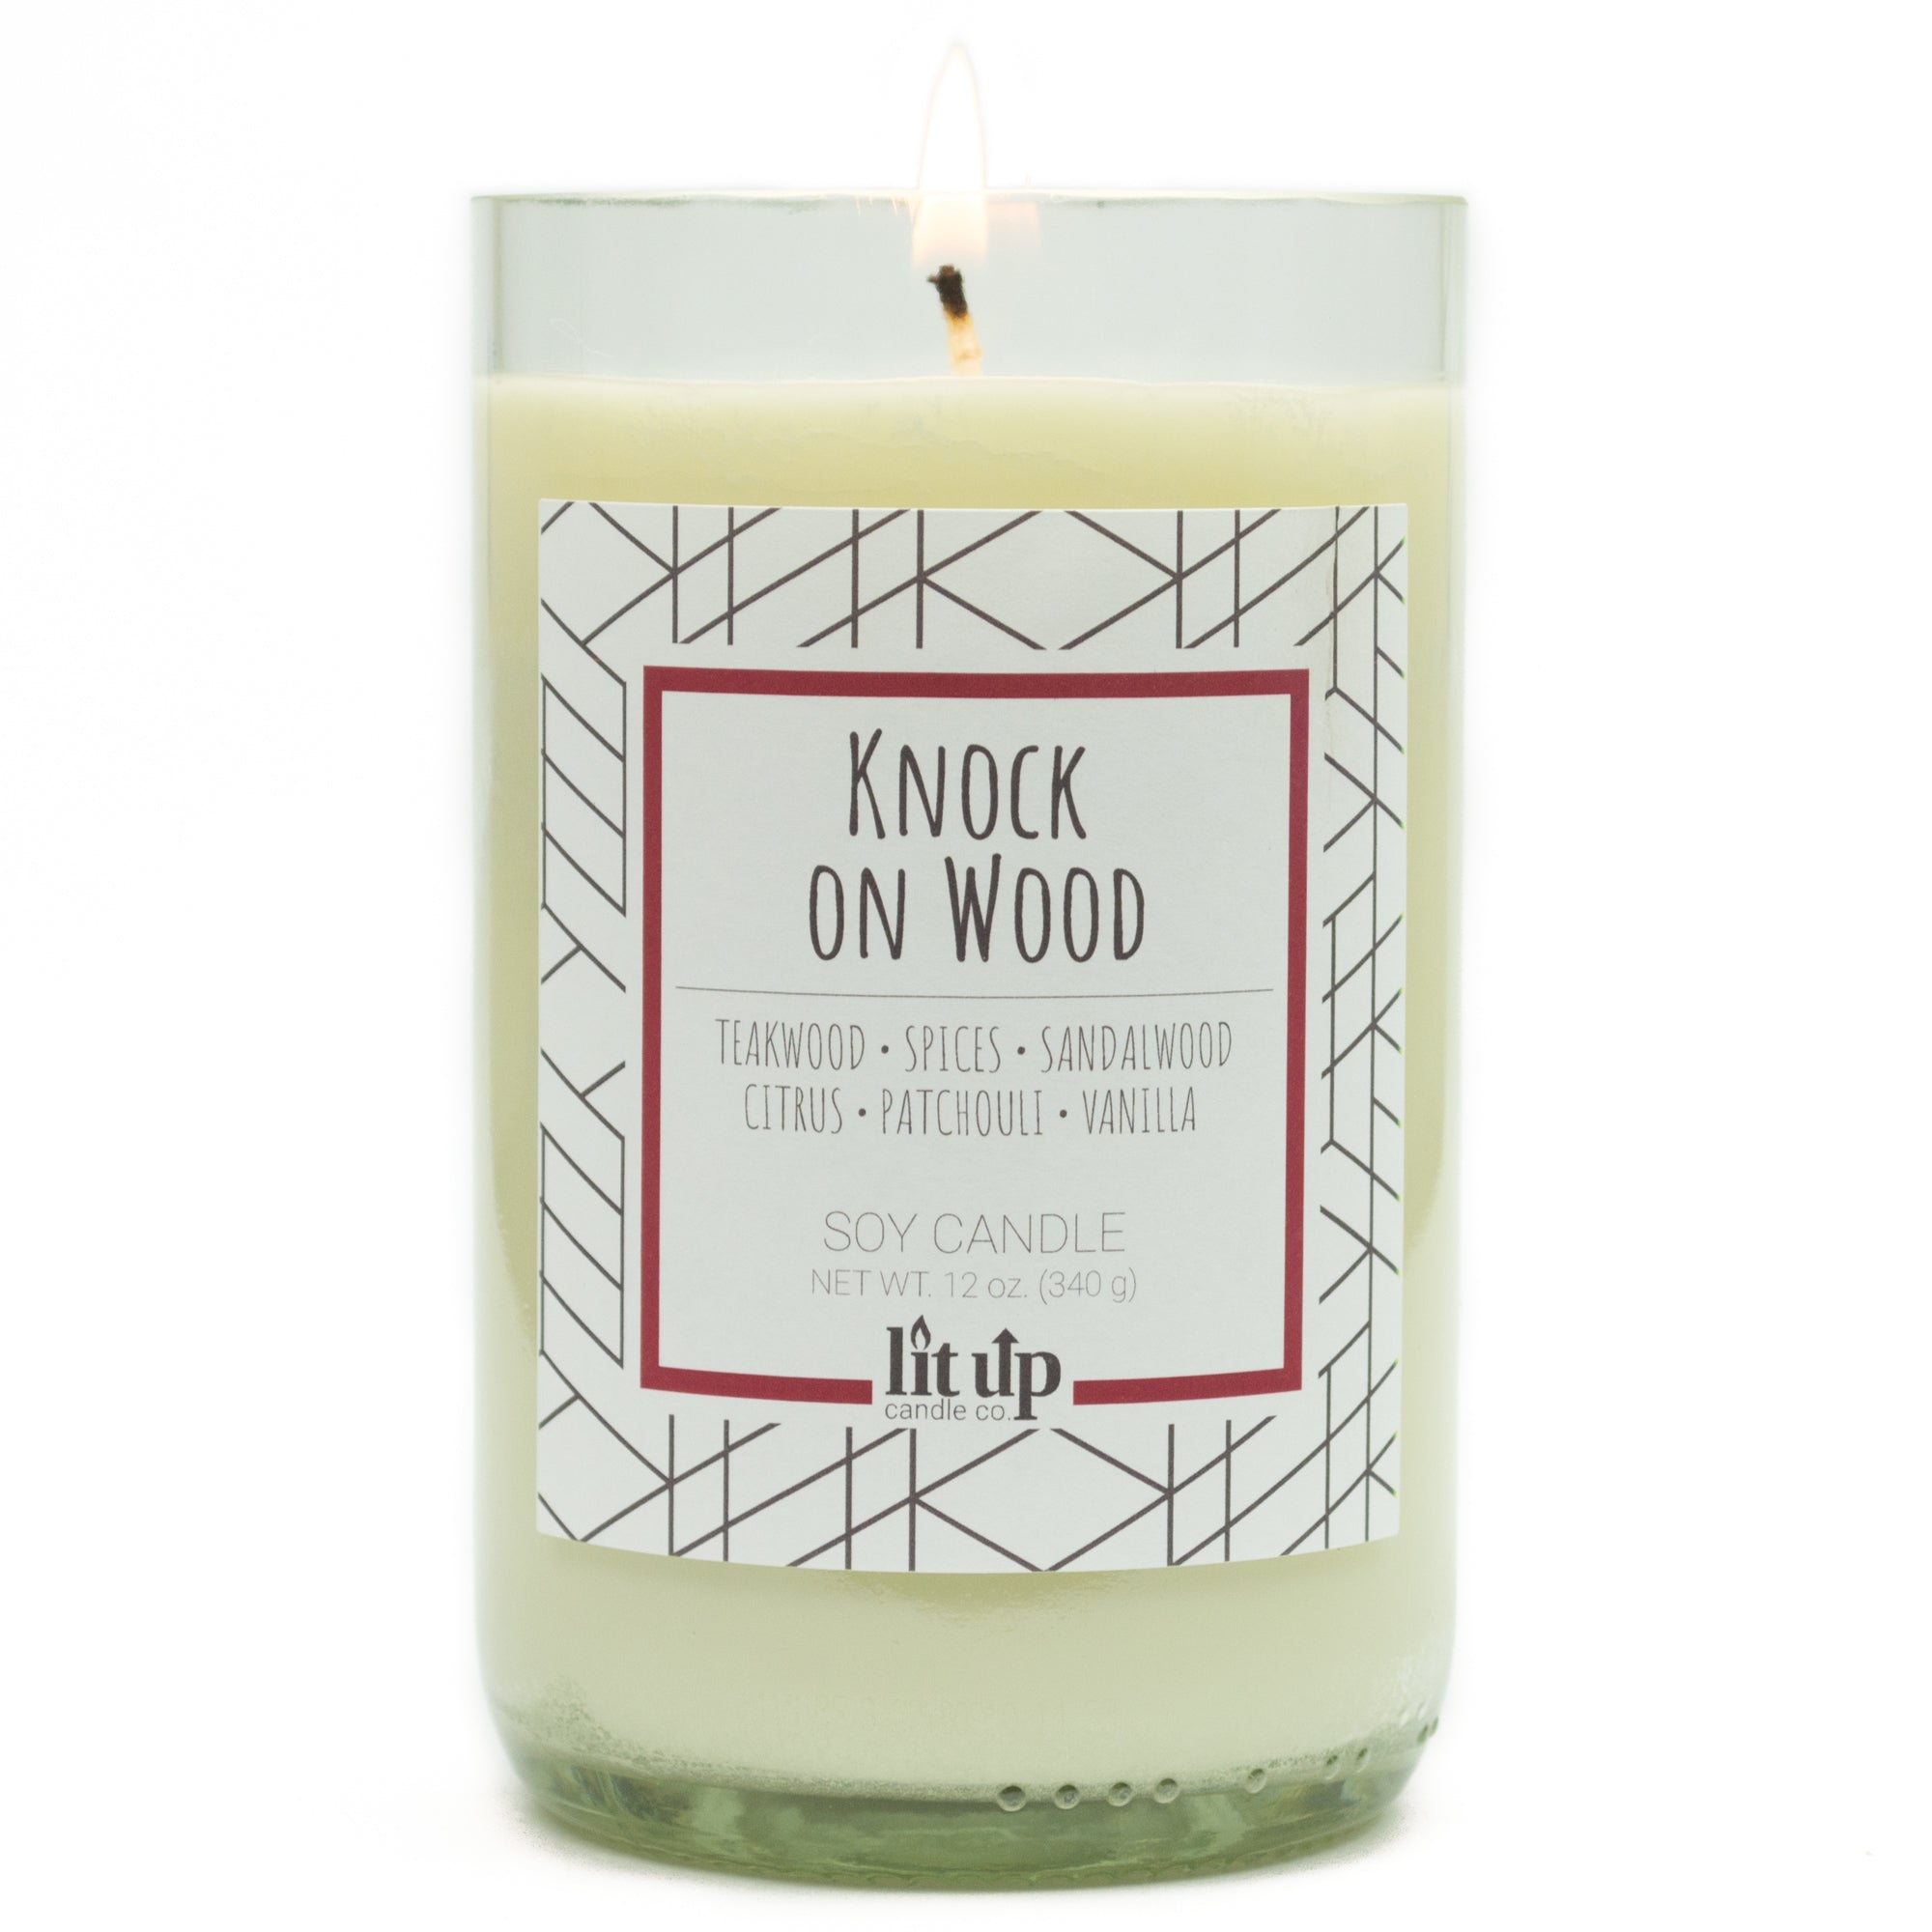 Knock on Wood scented 12 oz. soy candle in upcycled wine bottle